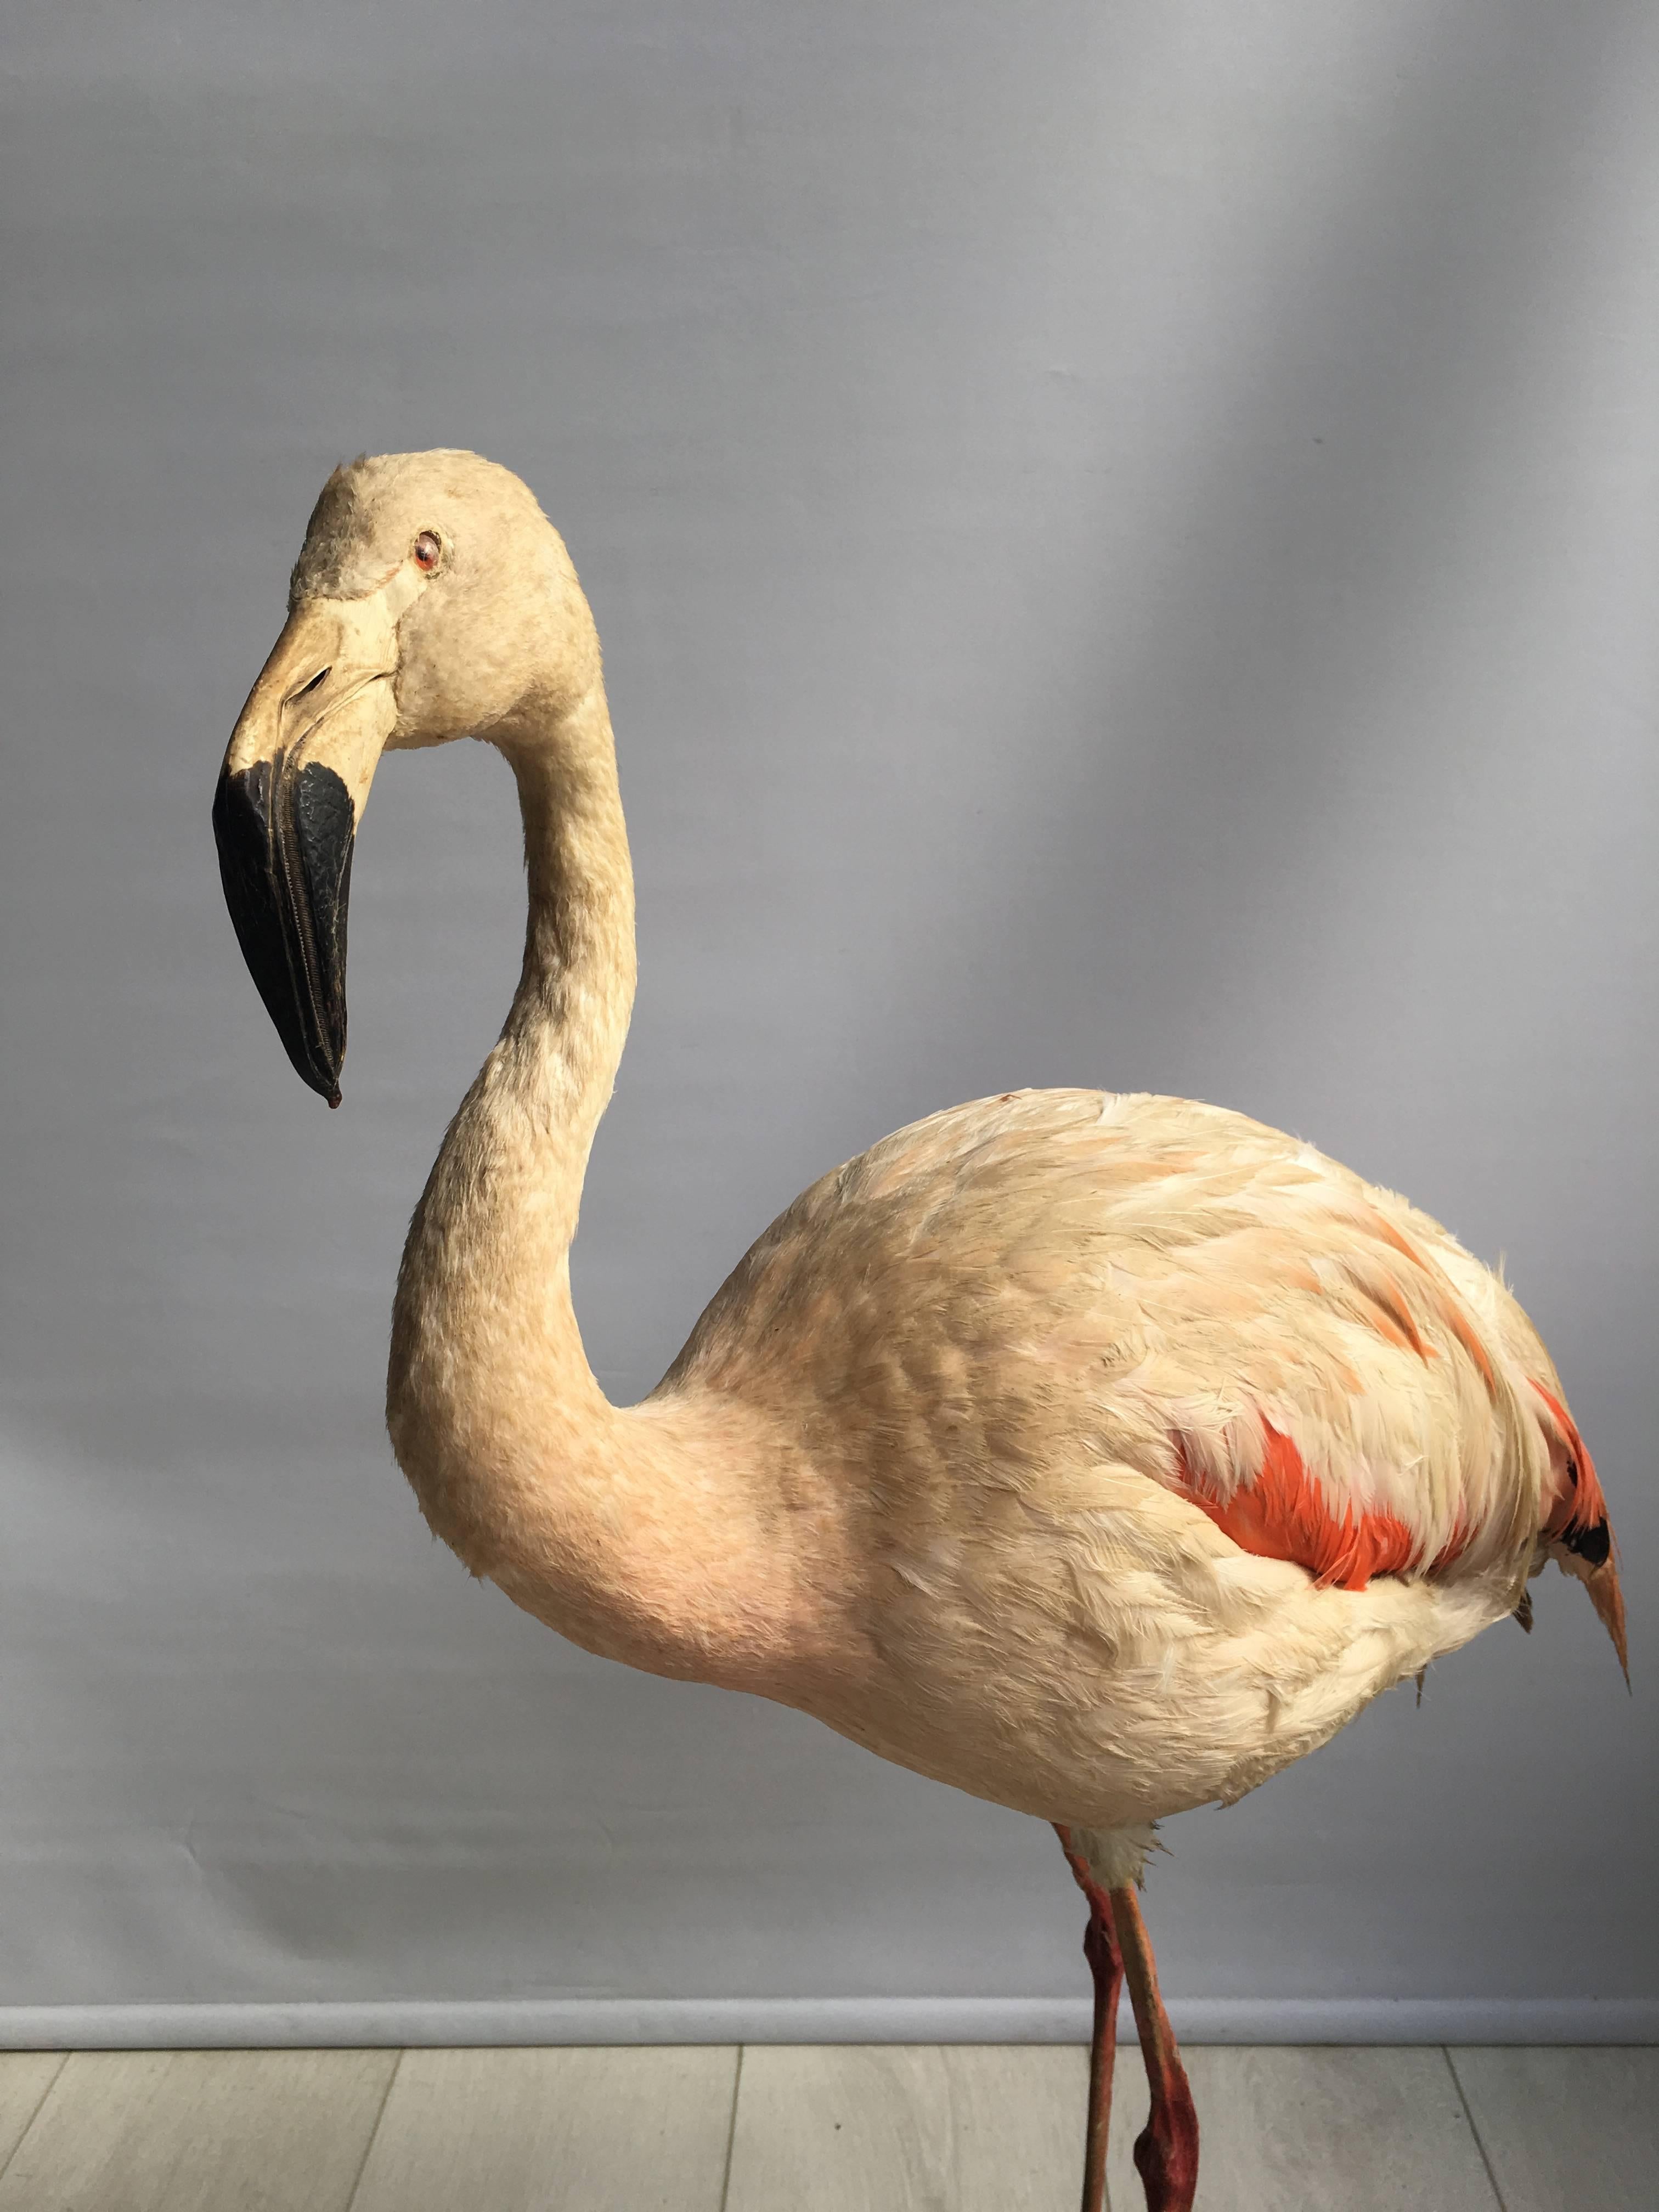 Rare example of taxidermy flamingo

Mounted on wooden base

Stands 82cm tall.